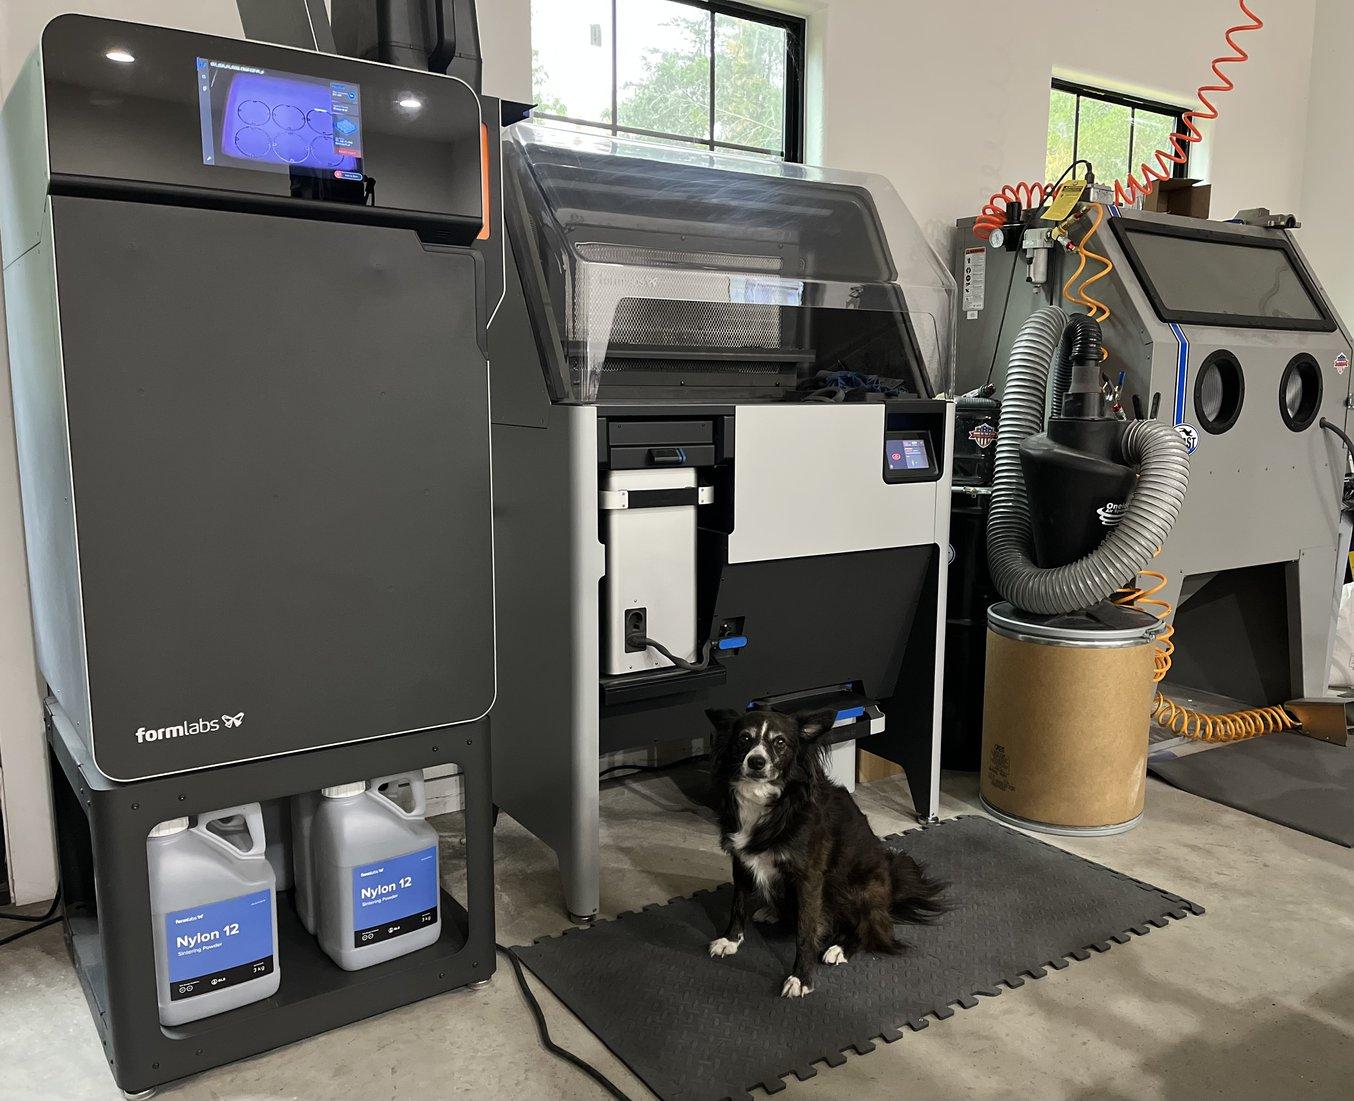 The Fuse 1 selective laser sintering (SLS) 3D printer, the Fuse Sift post-processing unit, a media blaster, and a dog.